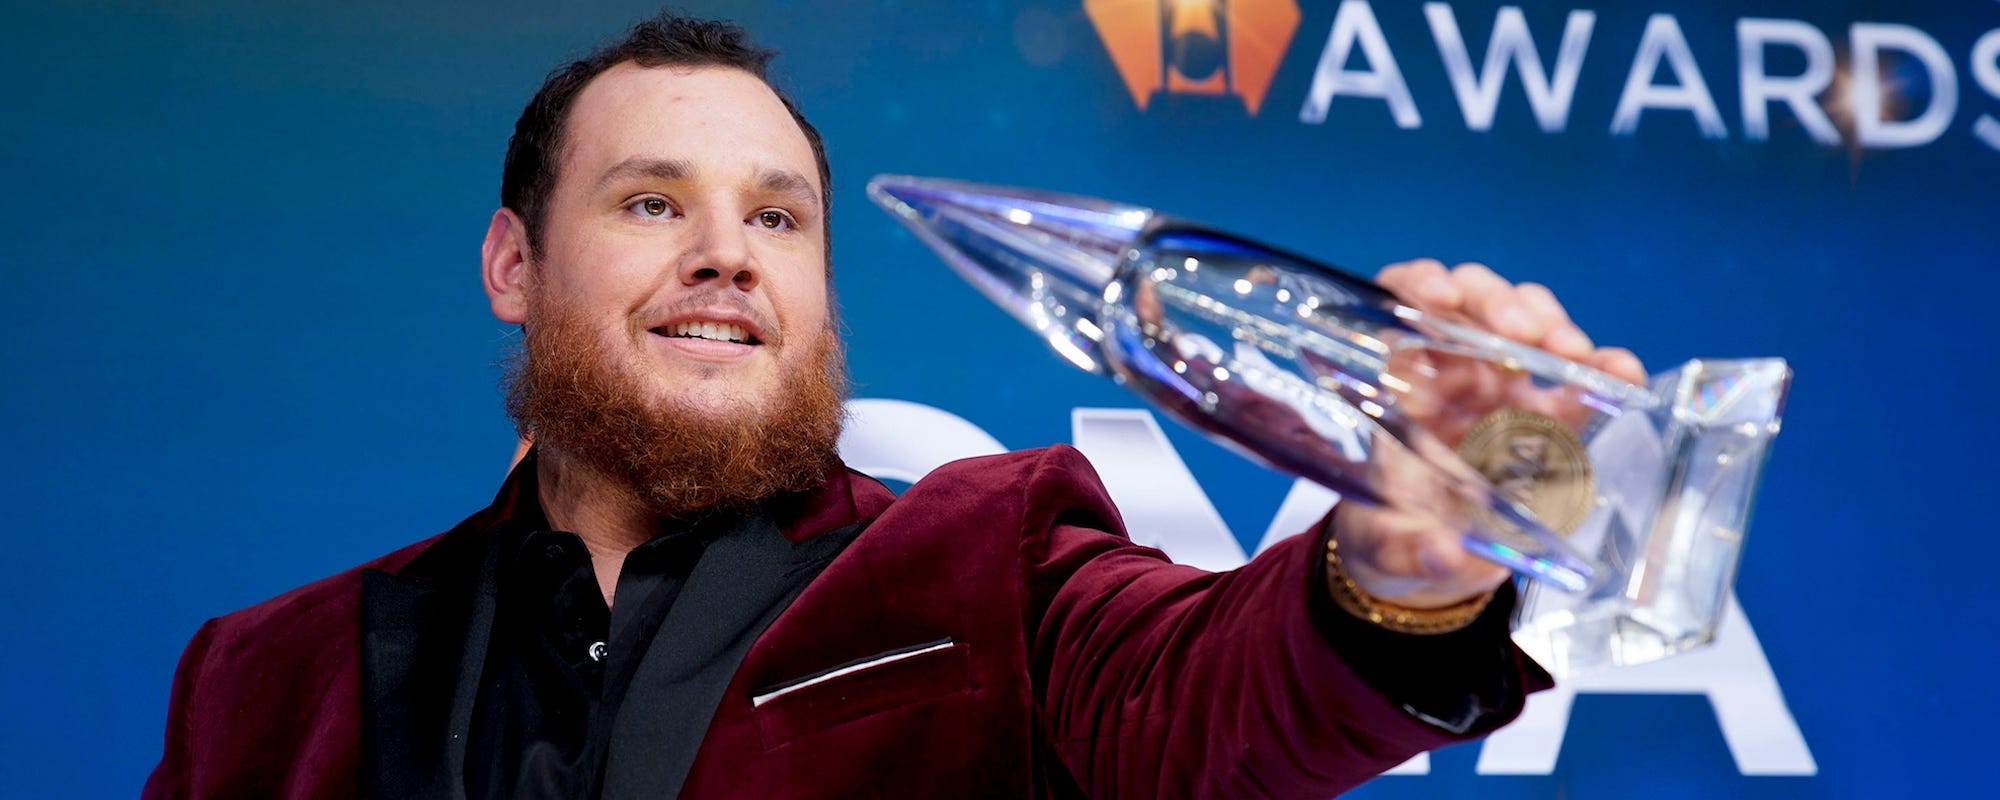 Luke Combs Crowned Entertainer of the Year at 2021 CMA Awards